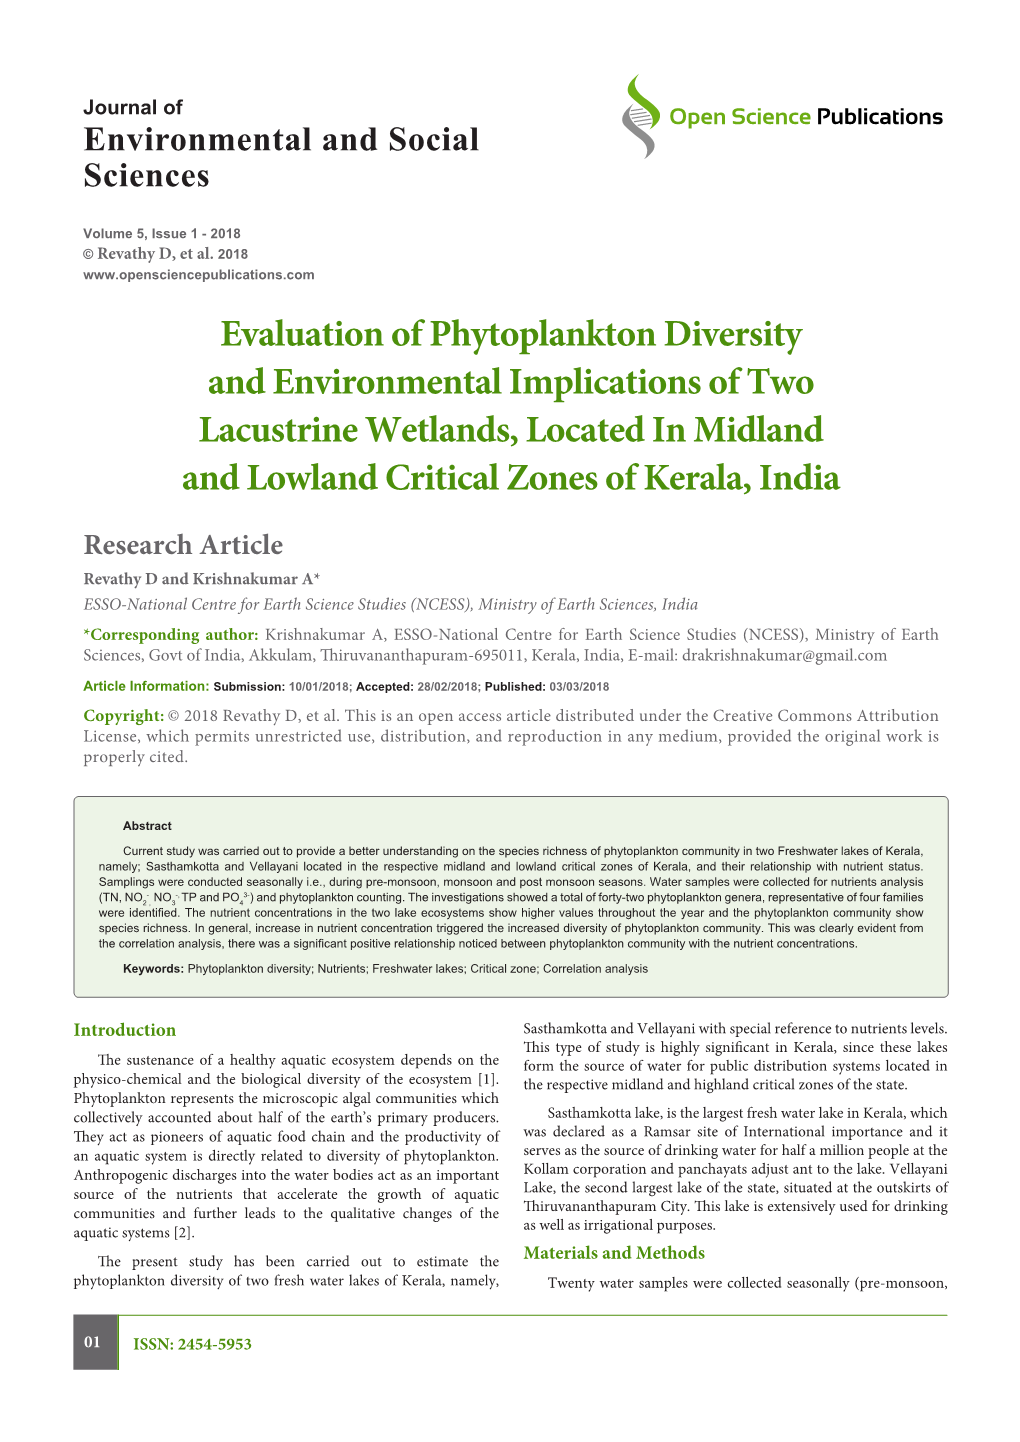 Evaluation of Phytoplankton Diversity and Environmental Implications of Two Lacustrine Wetlands, Located in Midland and Lowland Critical Zones of Kerala, India